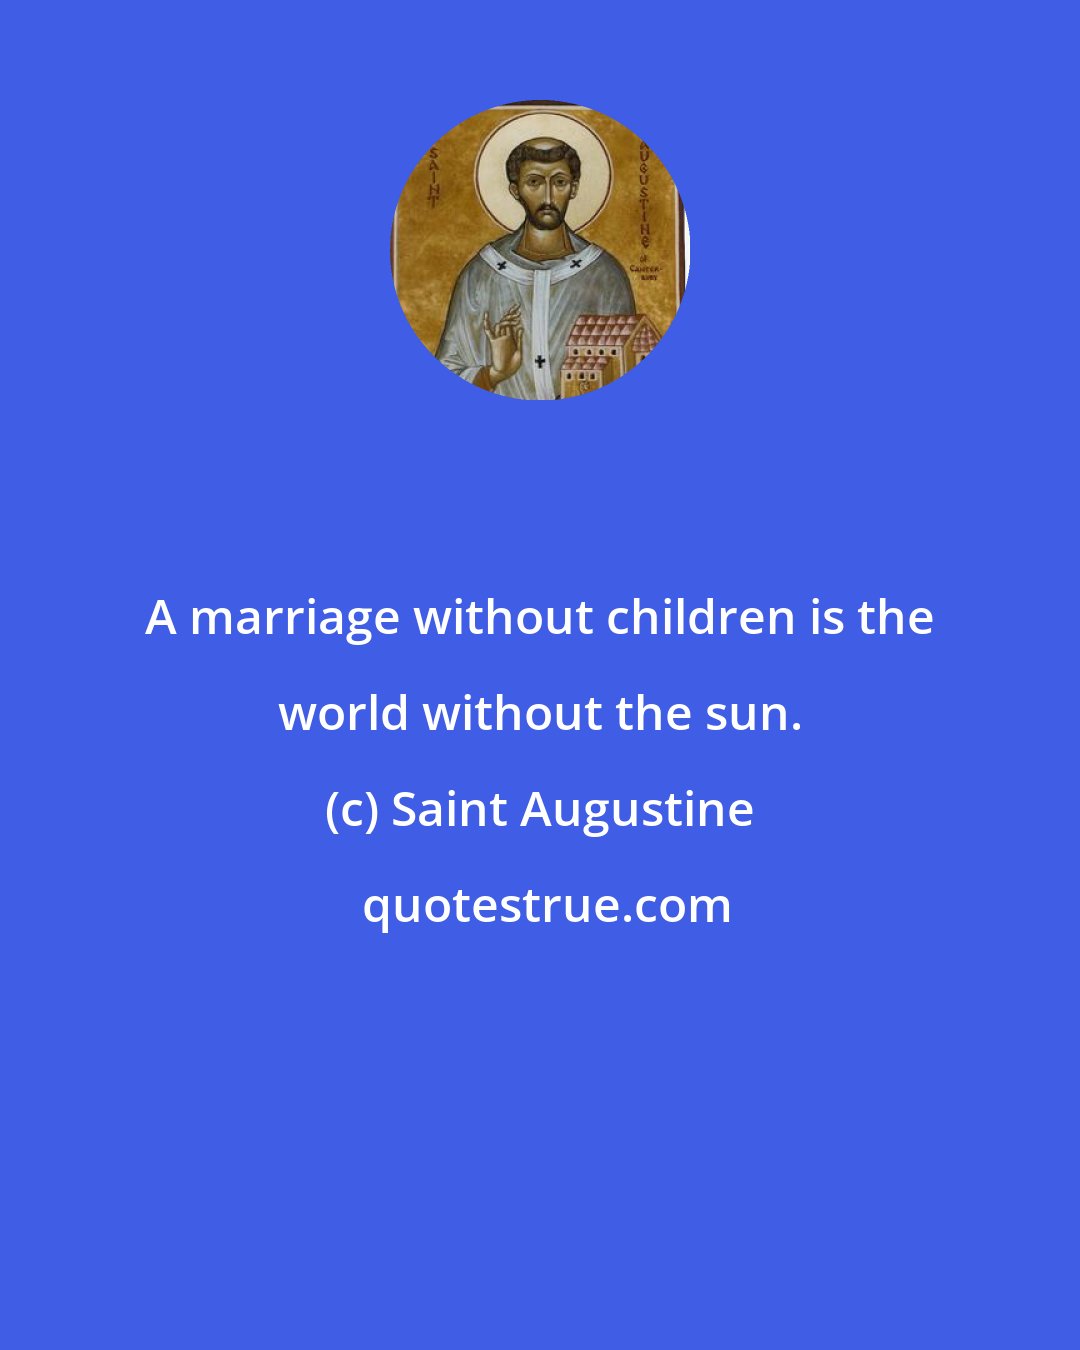 Saint Augustine: A marriage without children is the world without the sun.